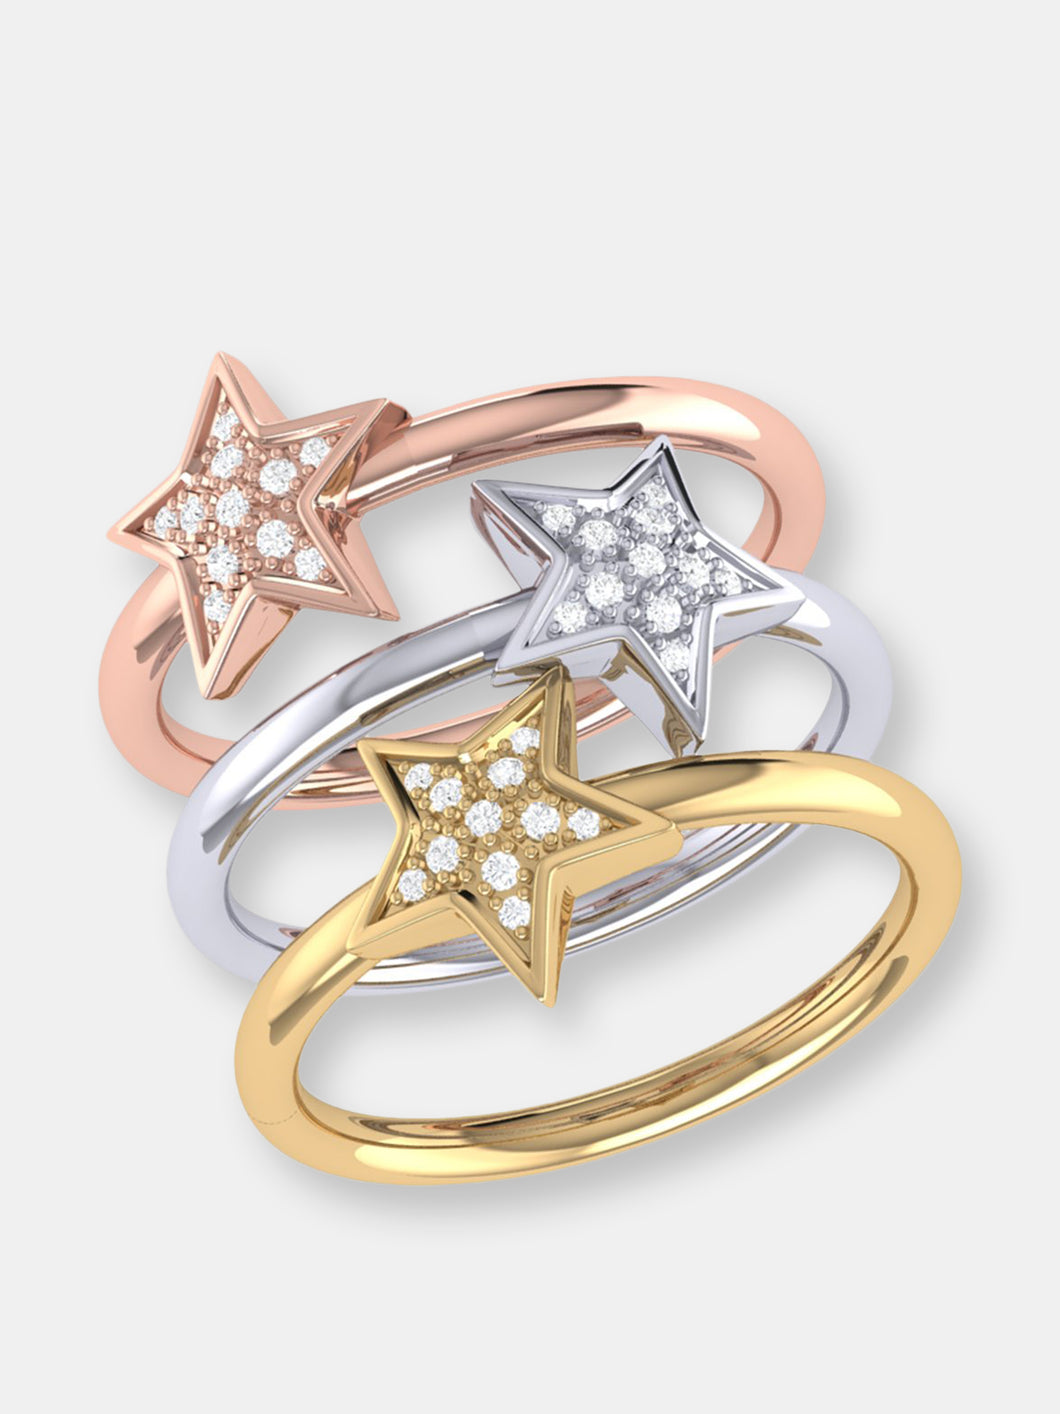 Tri-Color Dazzling Star Detachable Diamond Ring In 14K Gold & Rose Gold Vermeil On Sterling Silver